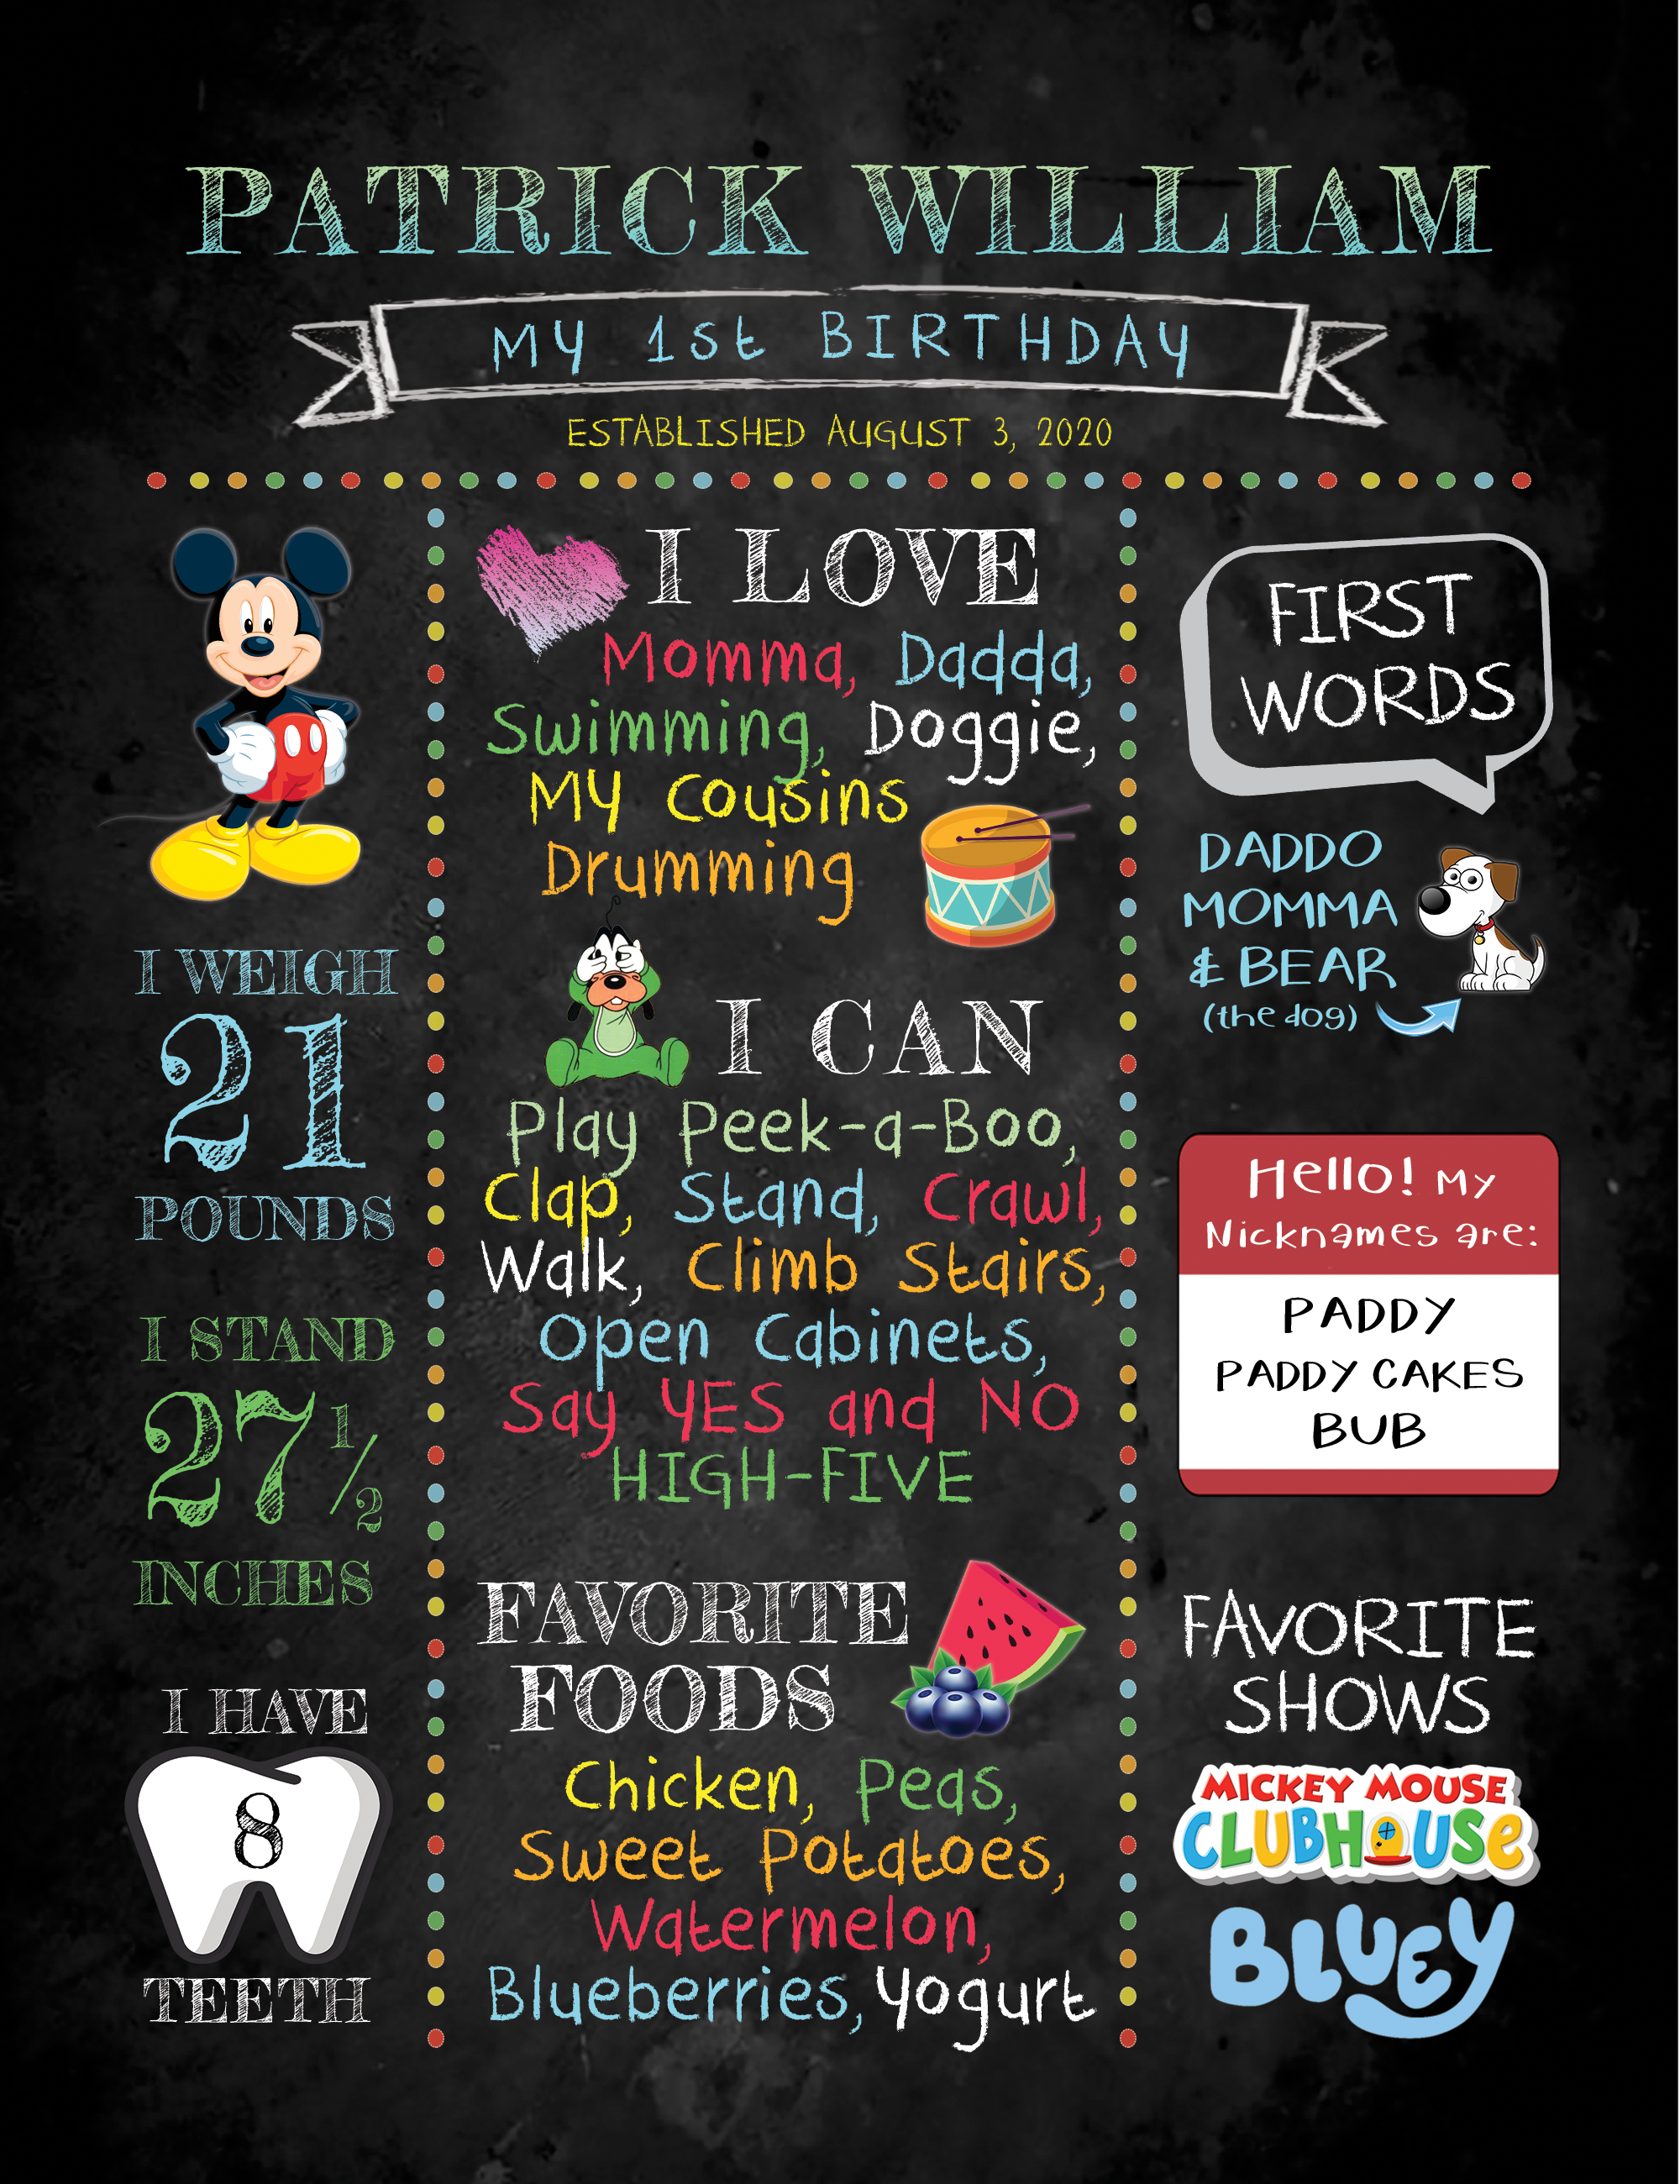 A poster to resemble a chalkboard sign that has 1st birthday stats for a little boy named Patrick.